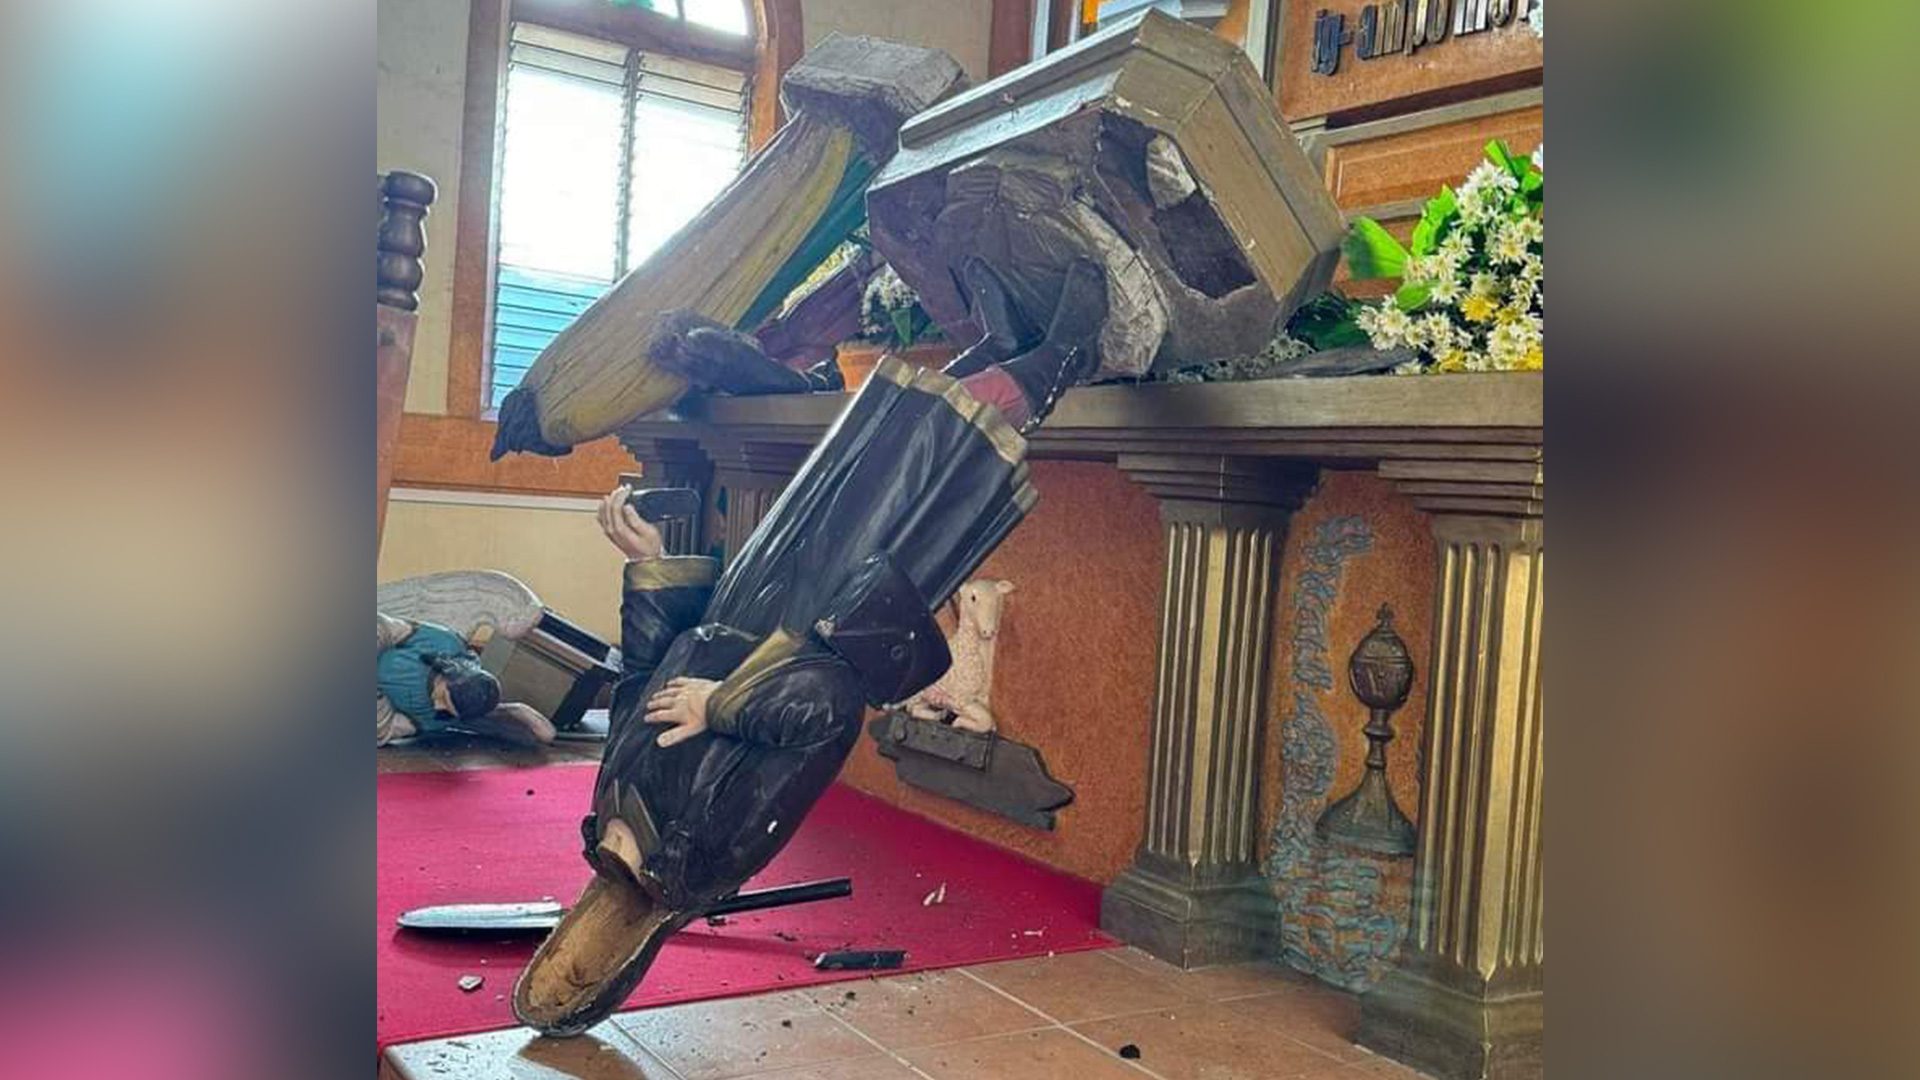 Man disrupts Mass, smashes statues in Negros Occidental church rampage